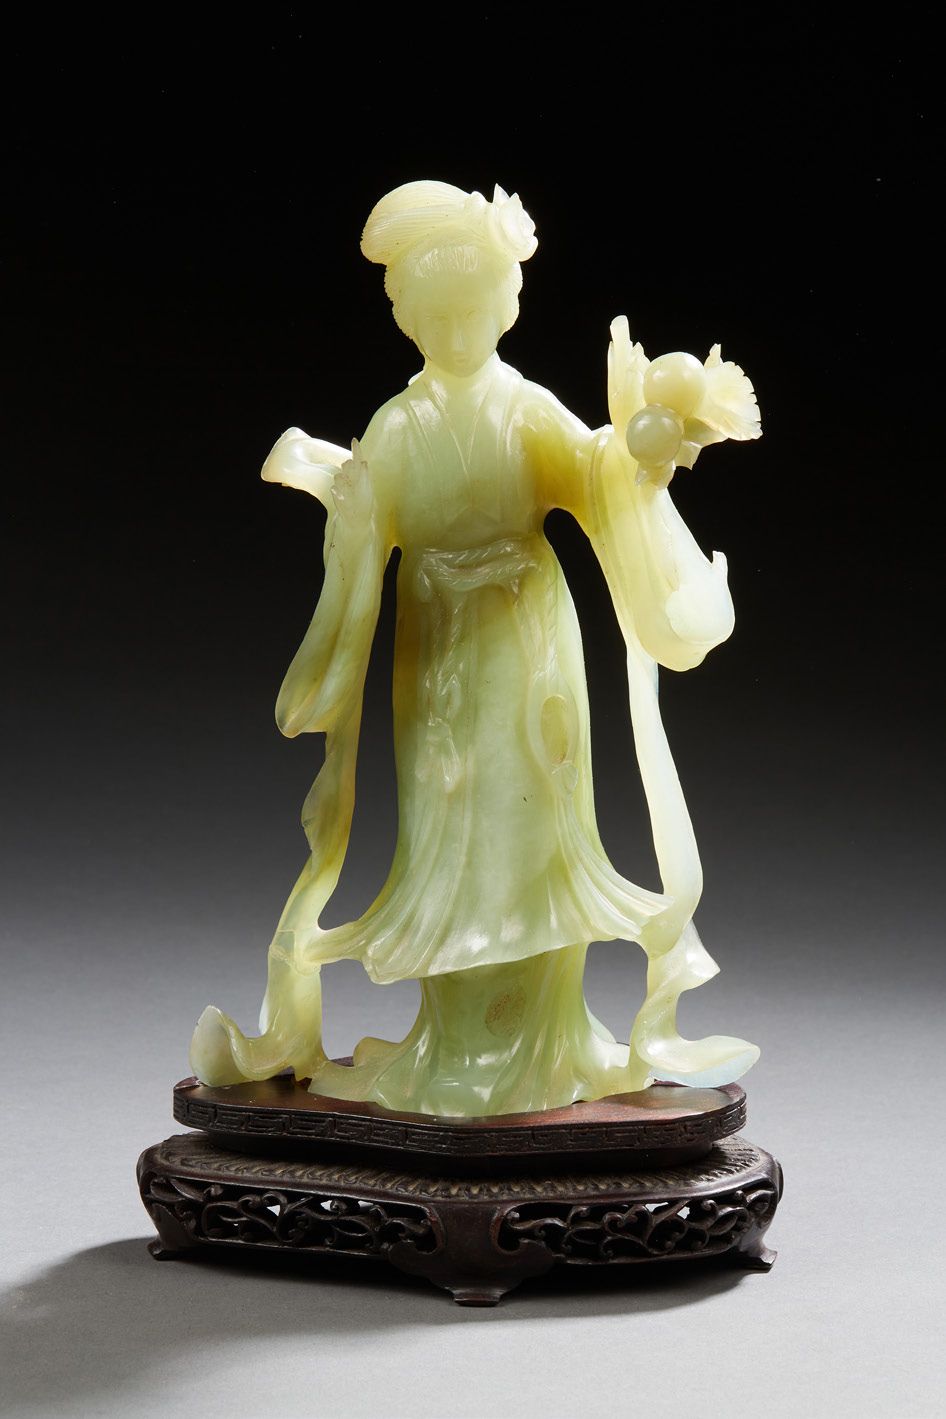 CHINE Hard stone figurine carved in the jade style representing a young woman ho&hellip;